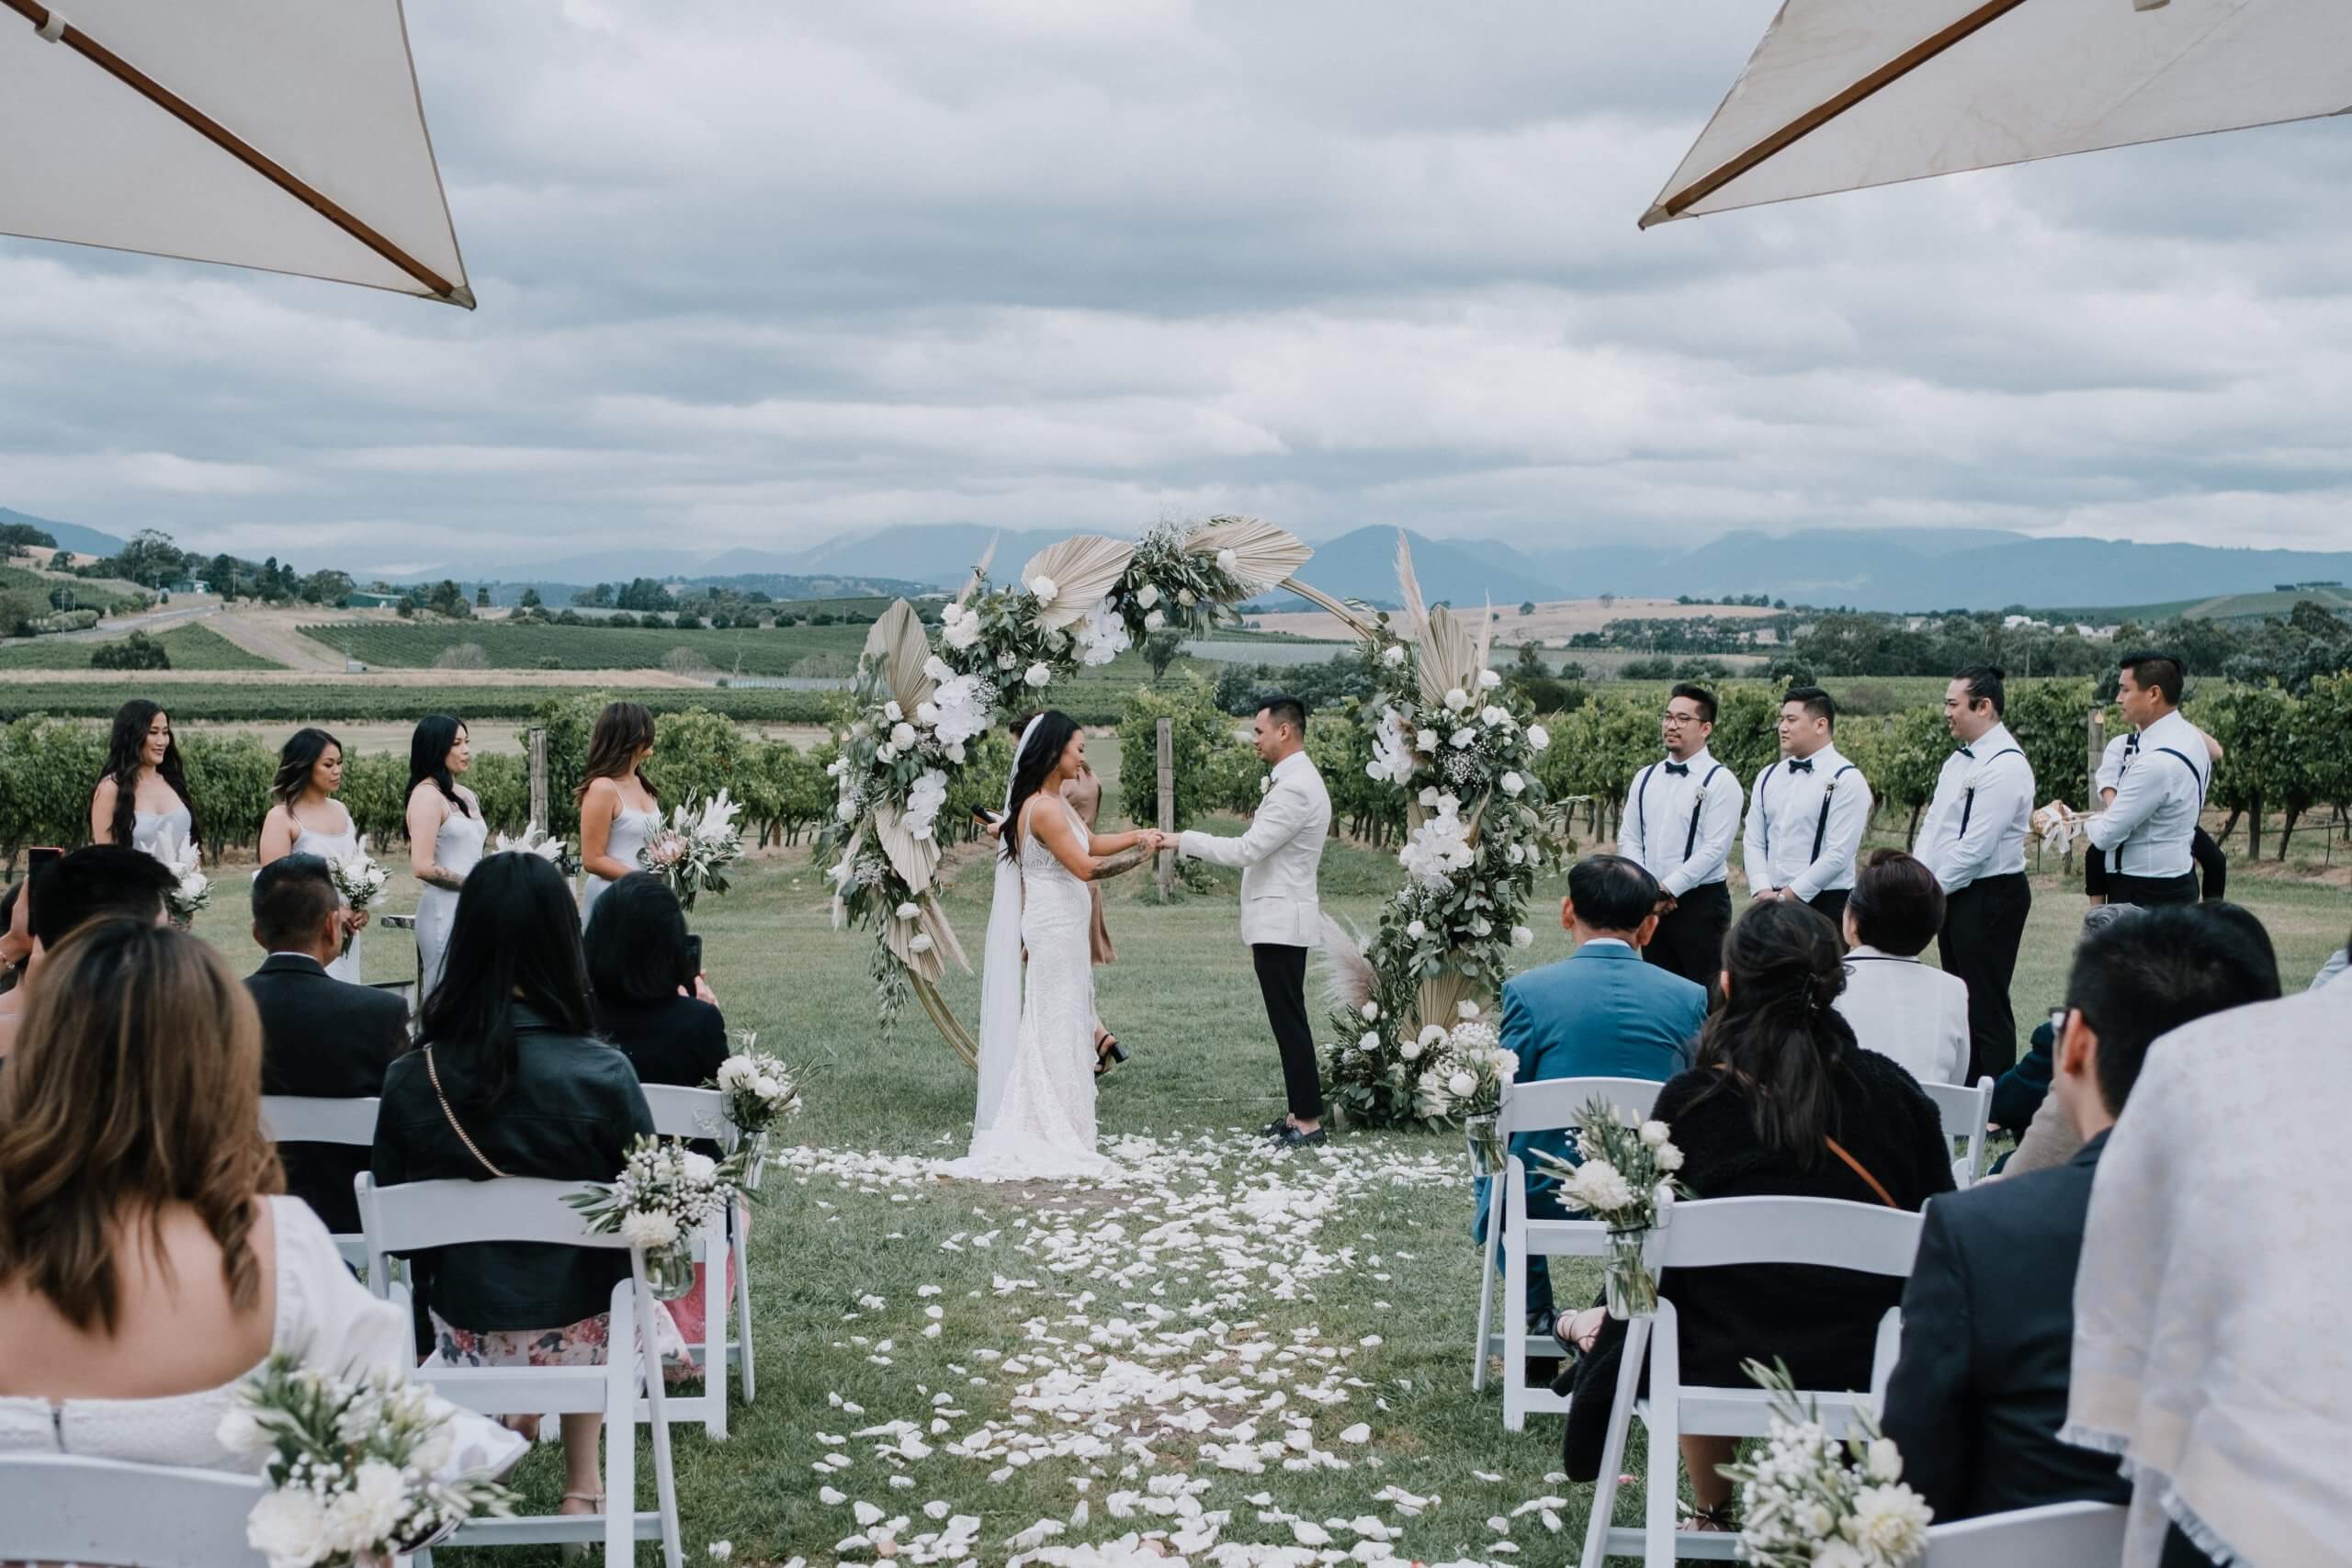 A lovely outdoor wedding ceremony showing the beautiful landscape behind the bride and groom as they are holding each other's hands and saying their vows. Captured by Black Avenue Productions